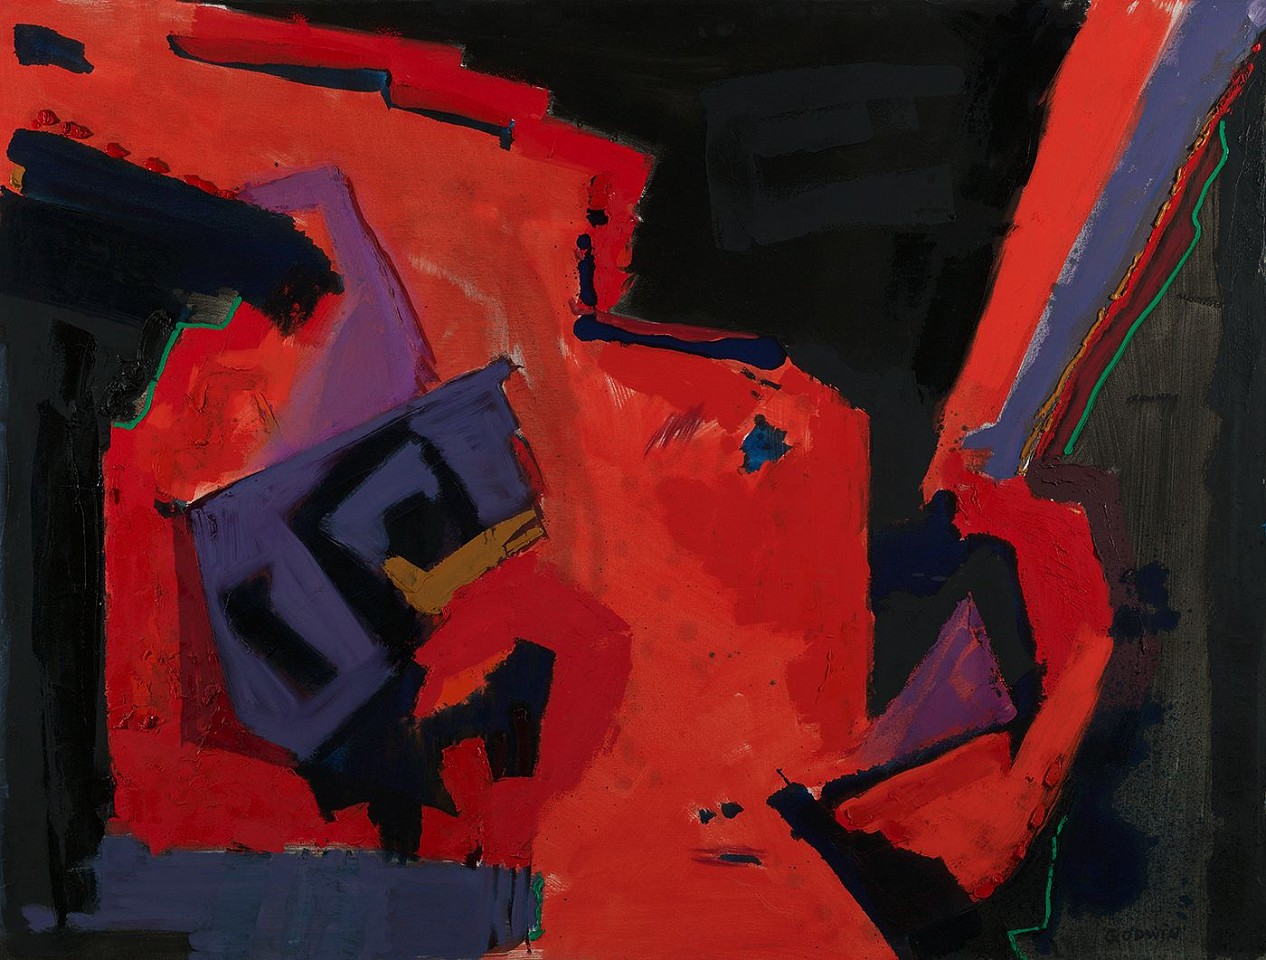 Judith Godwin, Occident | SOLD, 1982
Oil on canvas, 46 x 60 in. (116.8 x 152.4 cm)
SOLD
GOD-00011